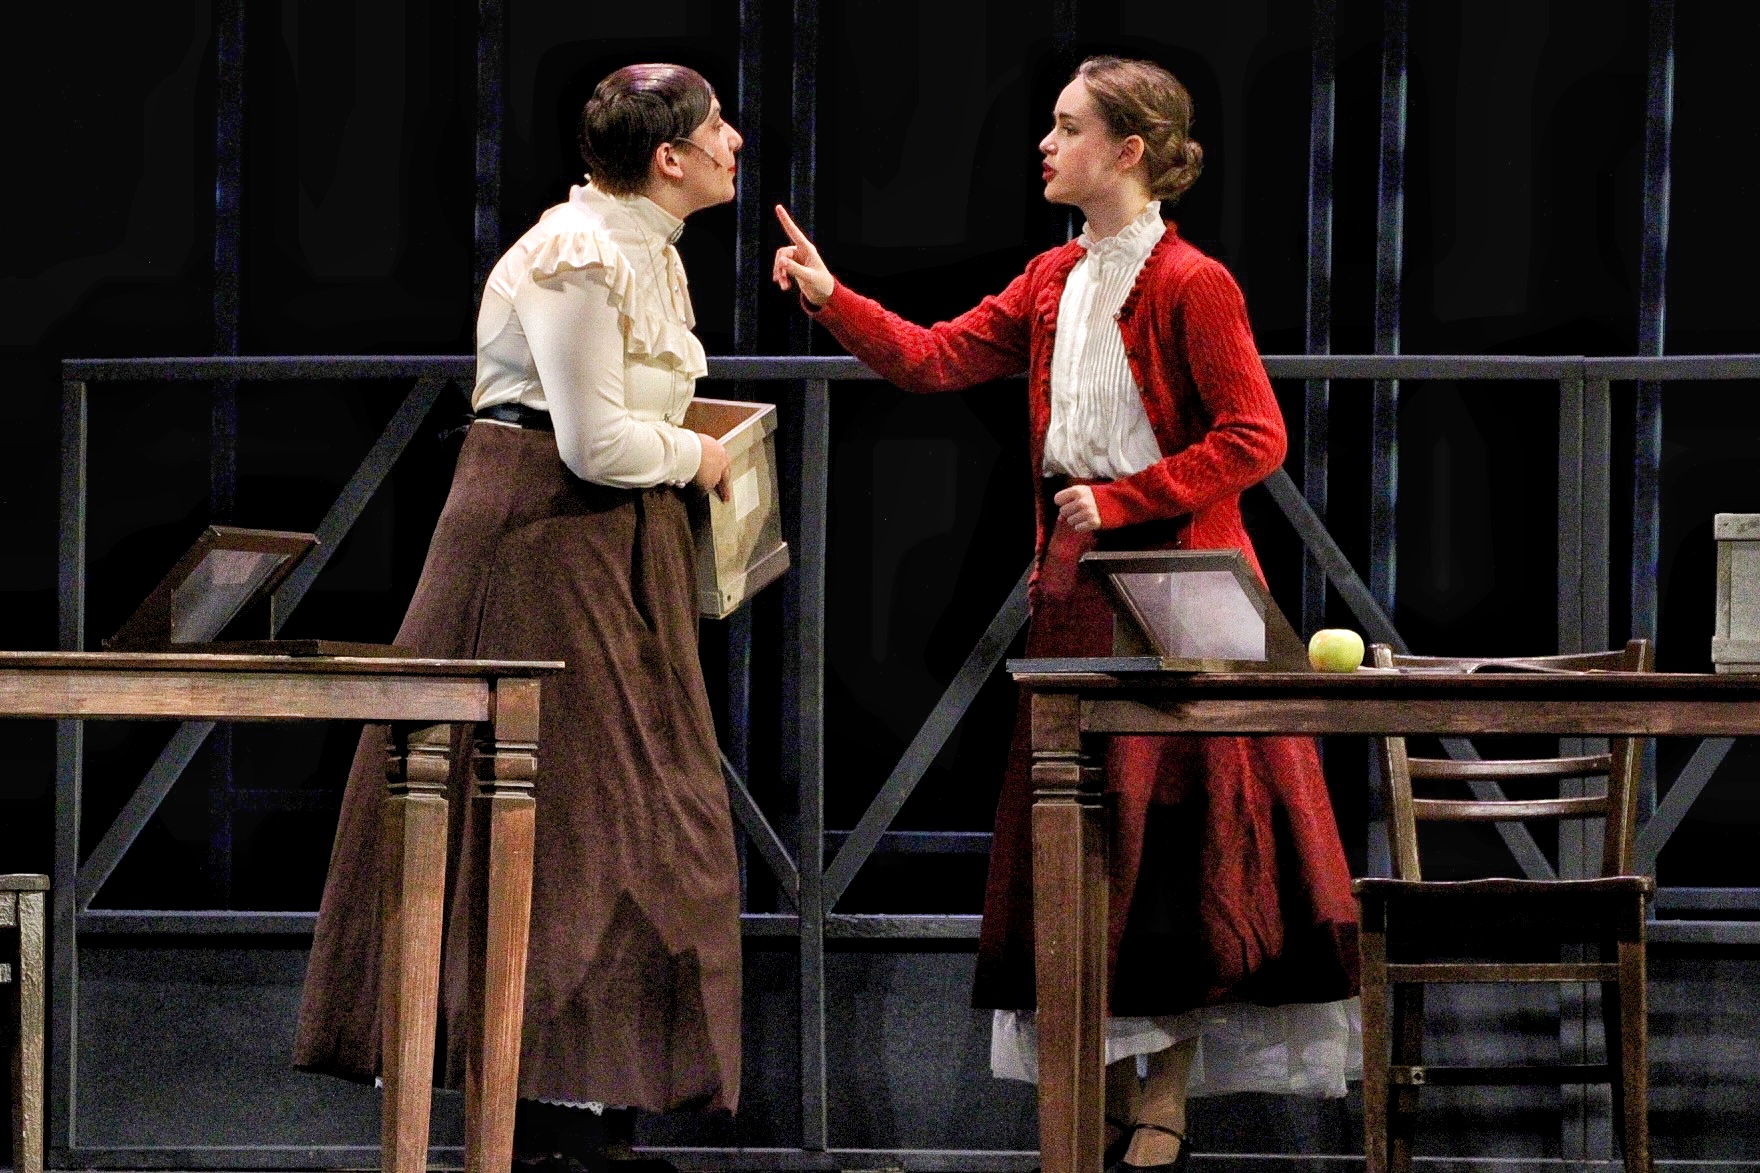 Wren Koziel, junior, and Miette Morris, senior, played the roles of Williamina Flemeing and Annie Cannon, NASA astronomers.